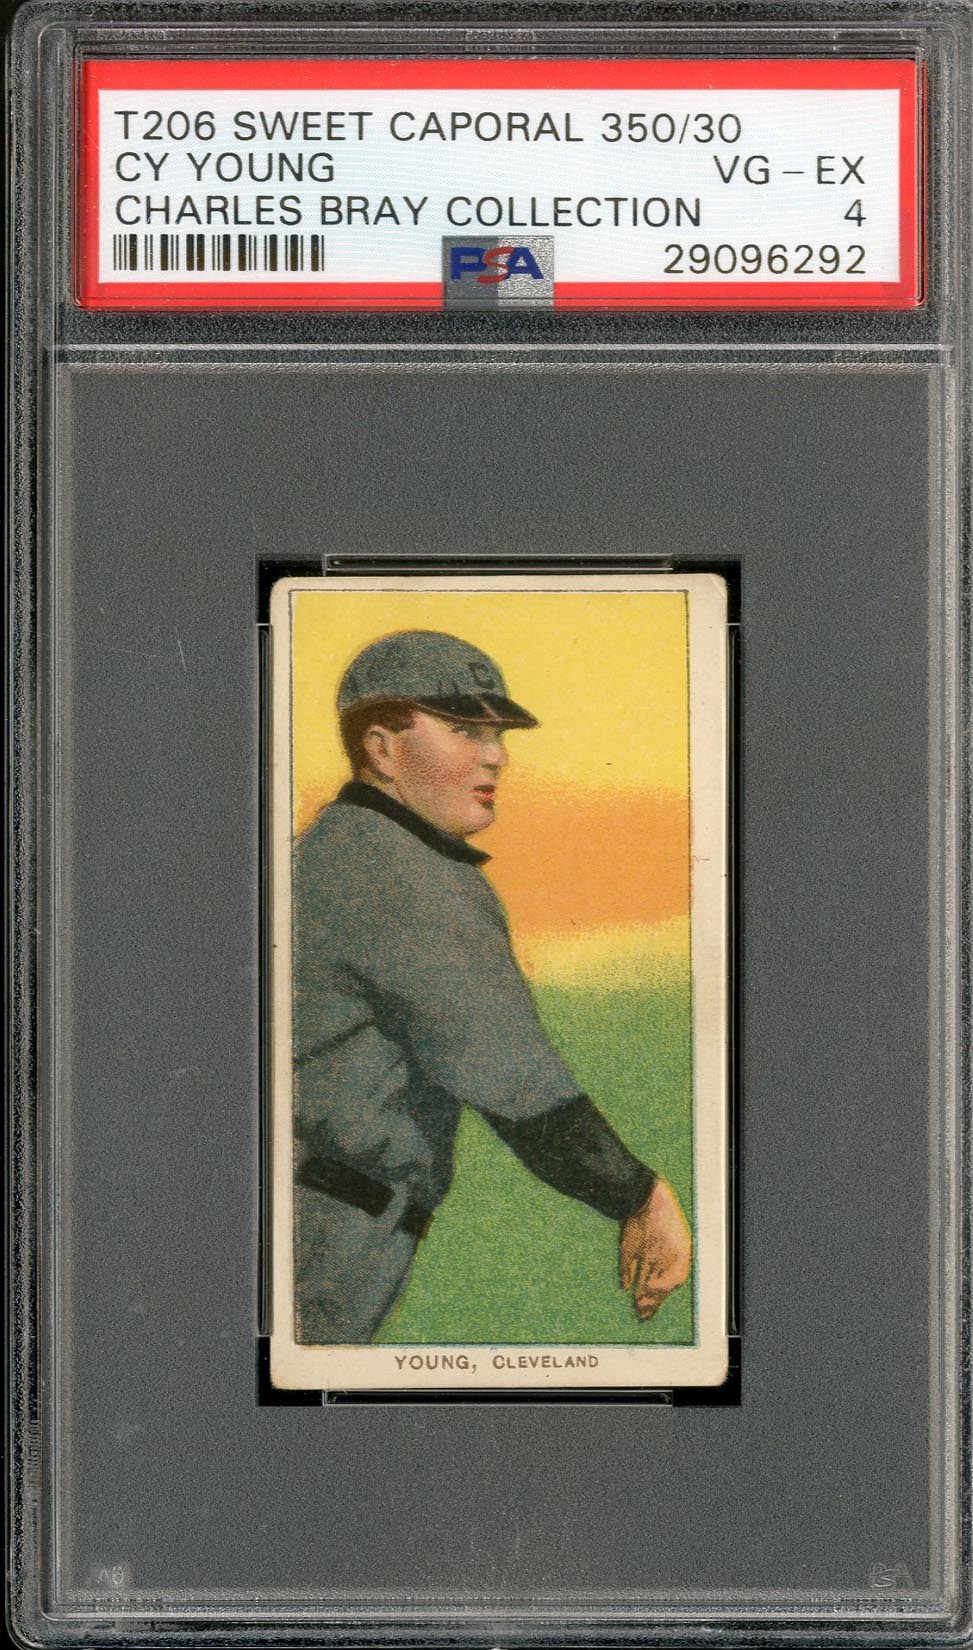 - T206 Cy Young Bare Hand Shows PSA VG-EX 4 - The Charles Bray Collection